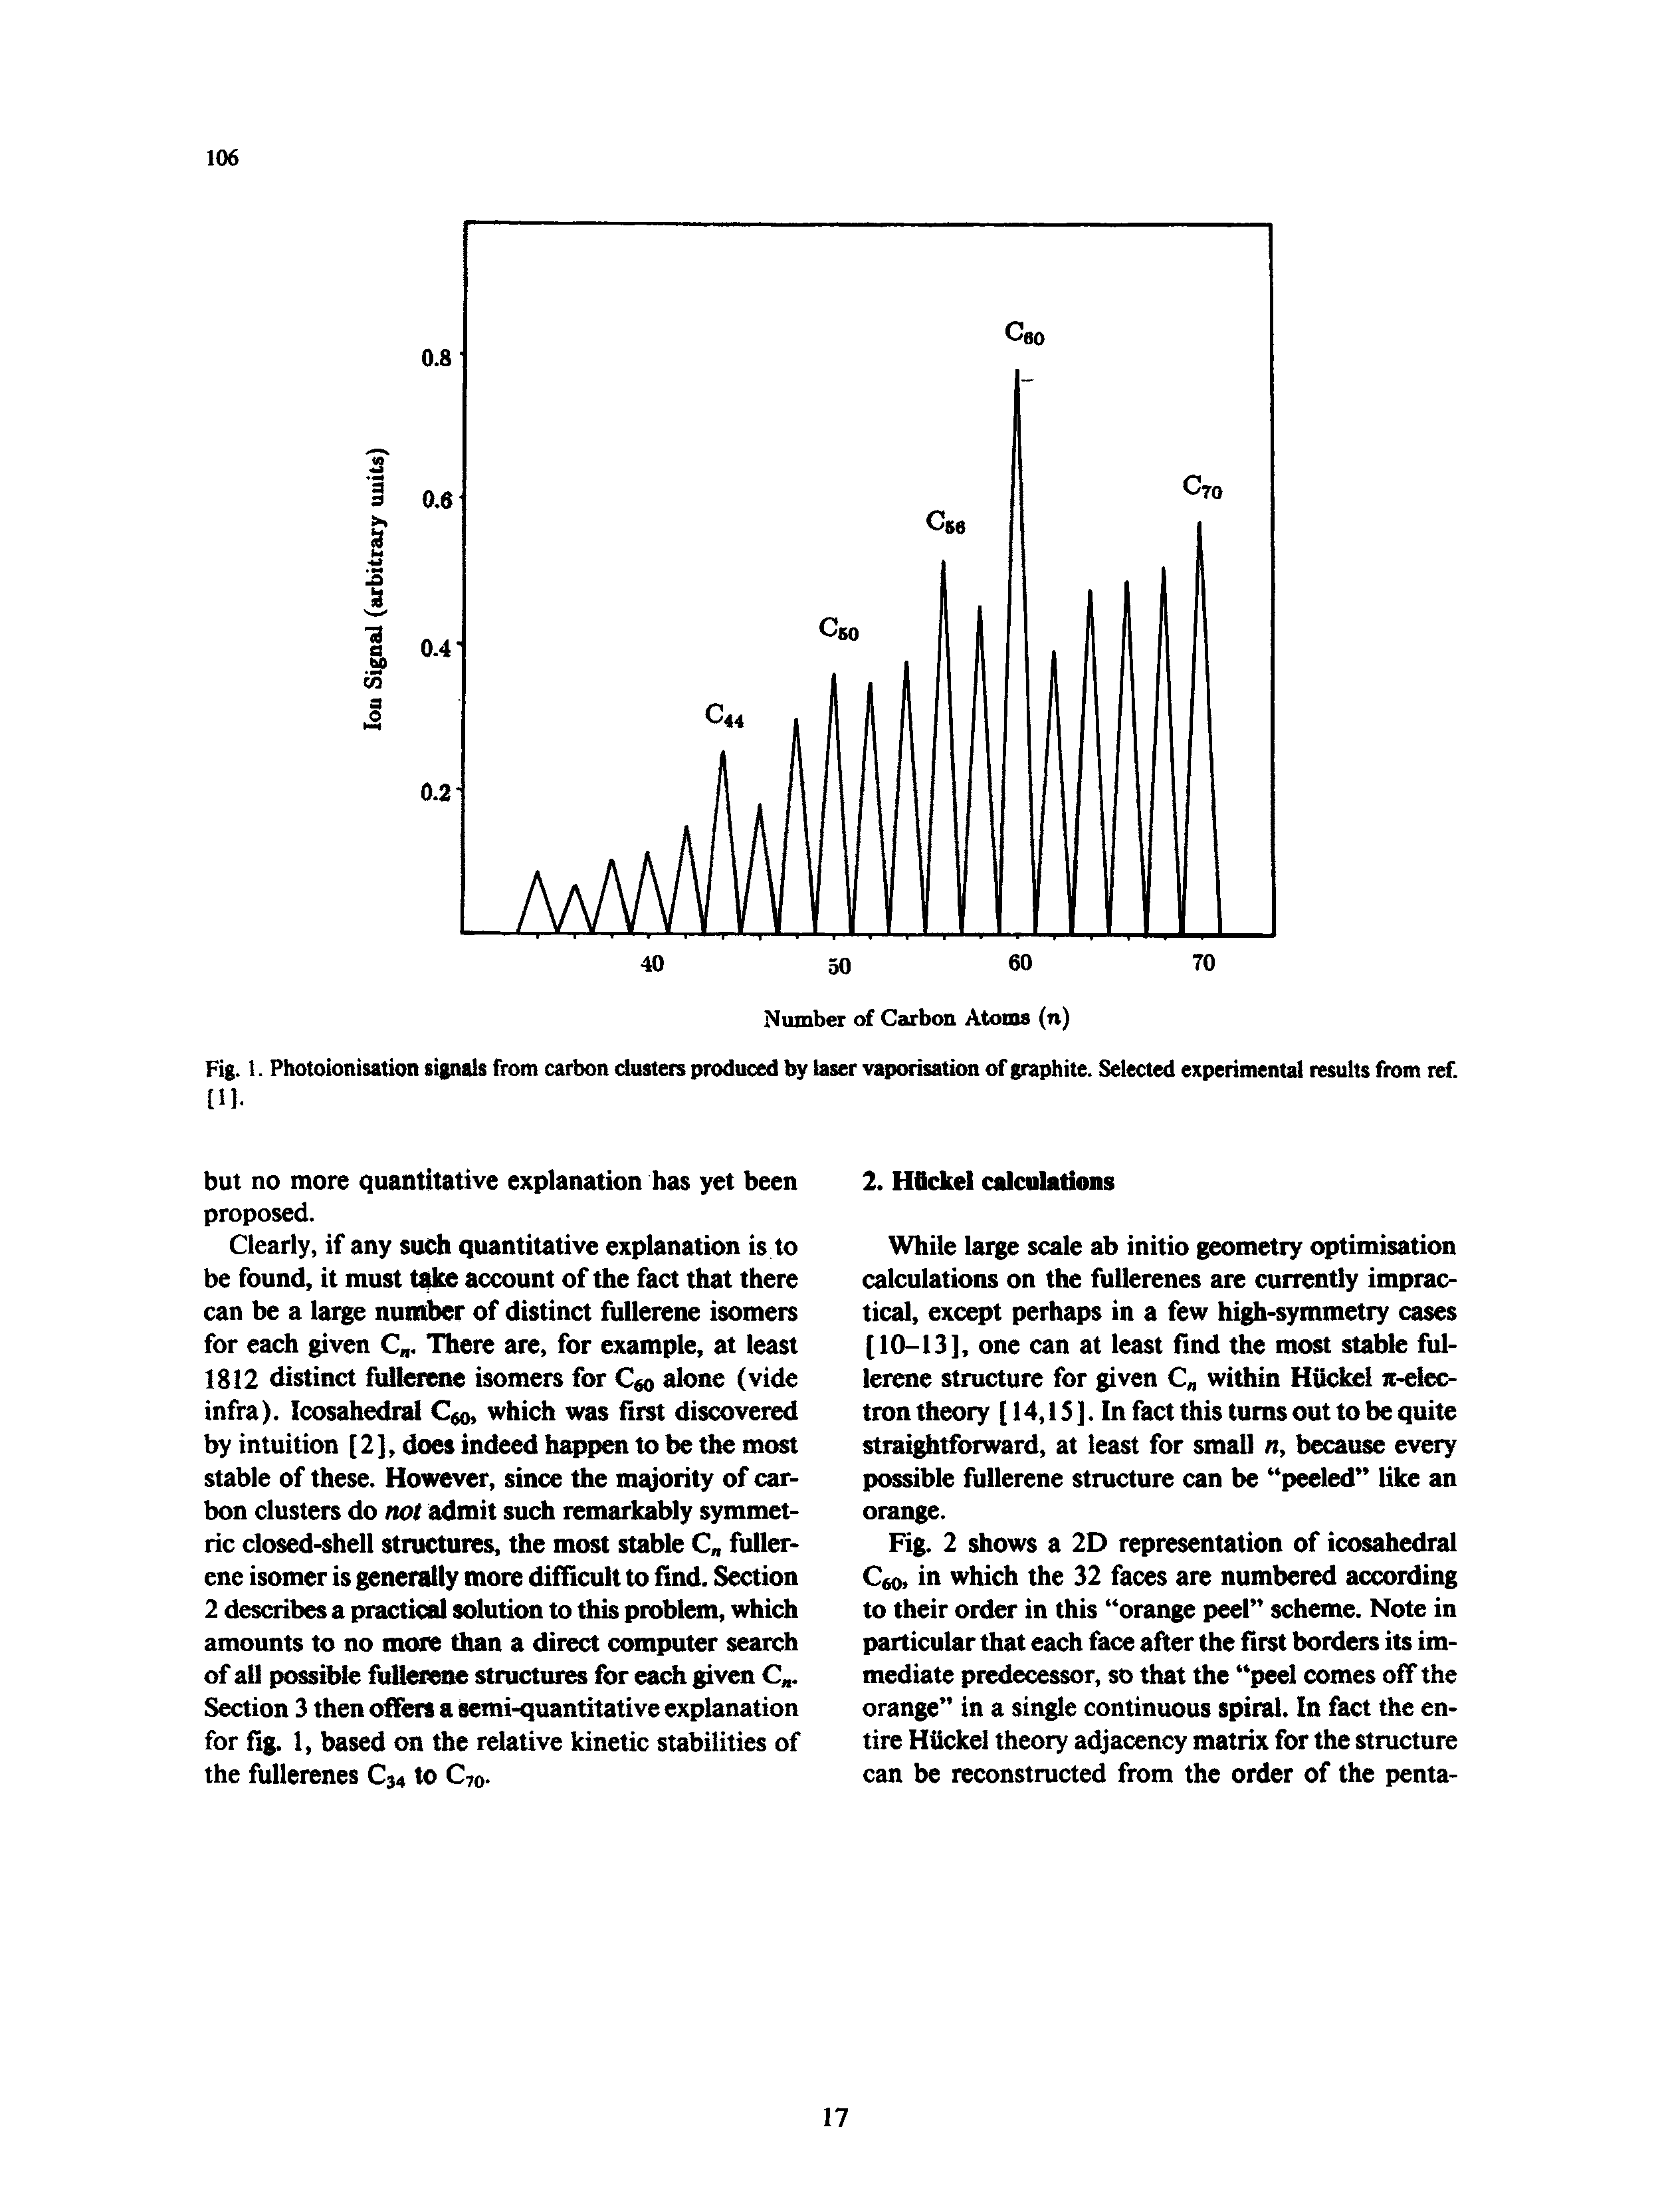 Fig. 1. Photoionisation signals from carbon dusters produced by laser vaporisation of graphite. Selected experimental results from ref. [11.